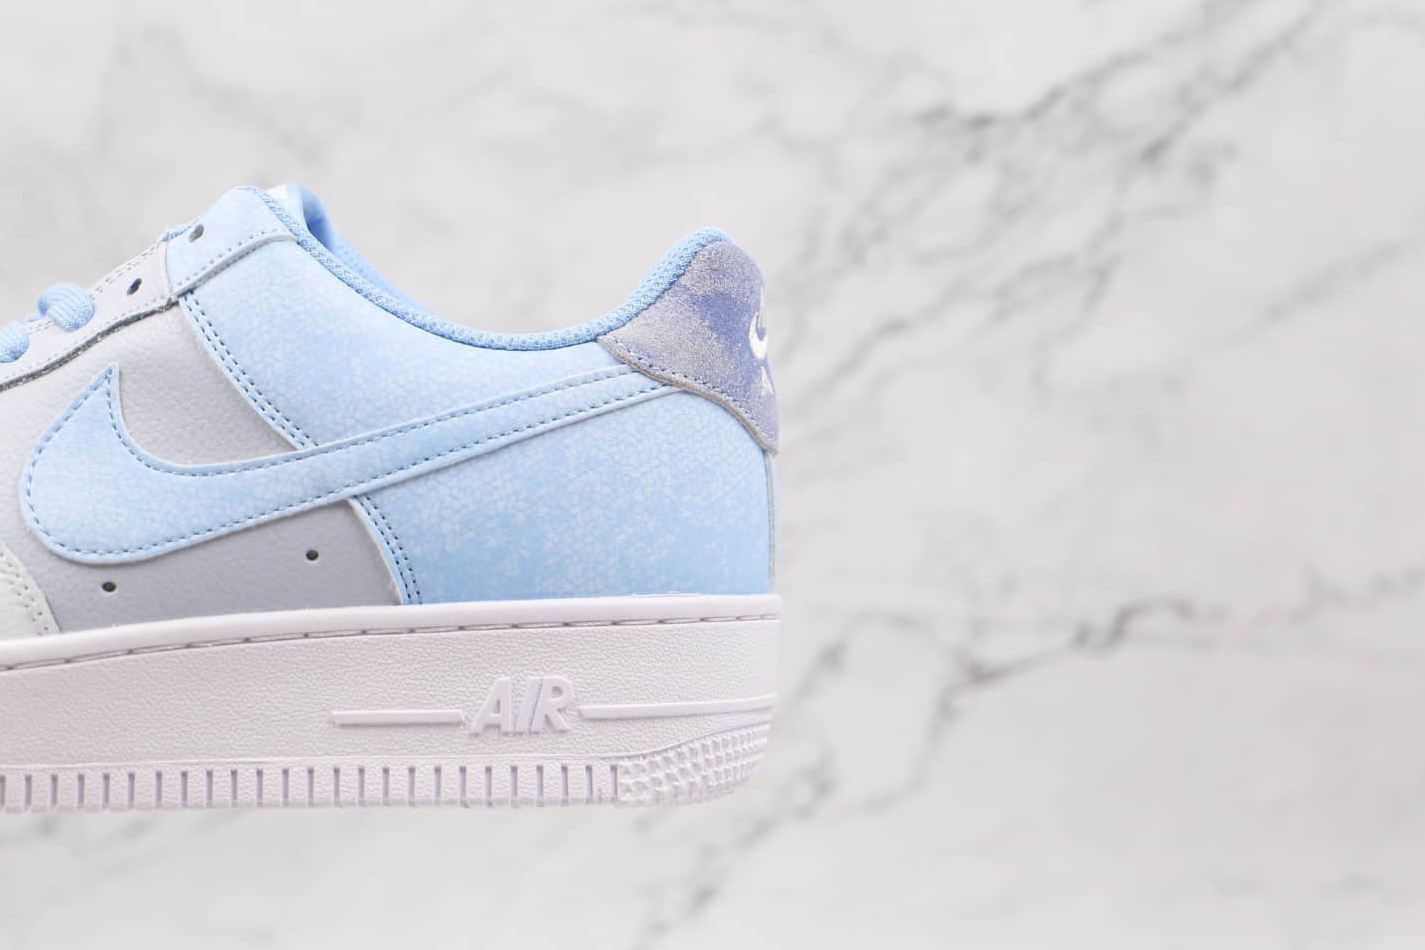 Nike Air Force 1 '07 LV8 'Psychic Blue' CZ0337-400 - Trendy Sneakers for Style-savvy Individuals